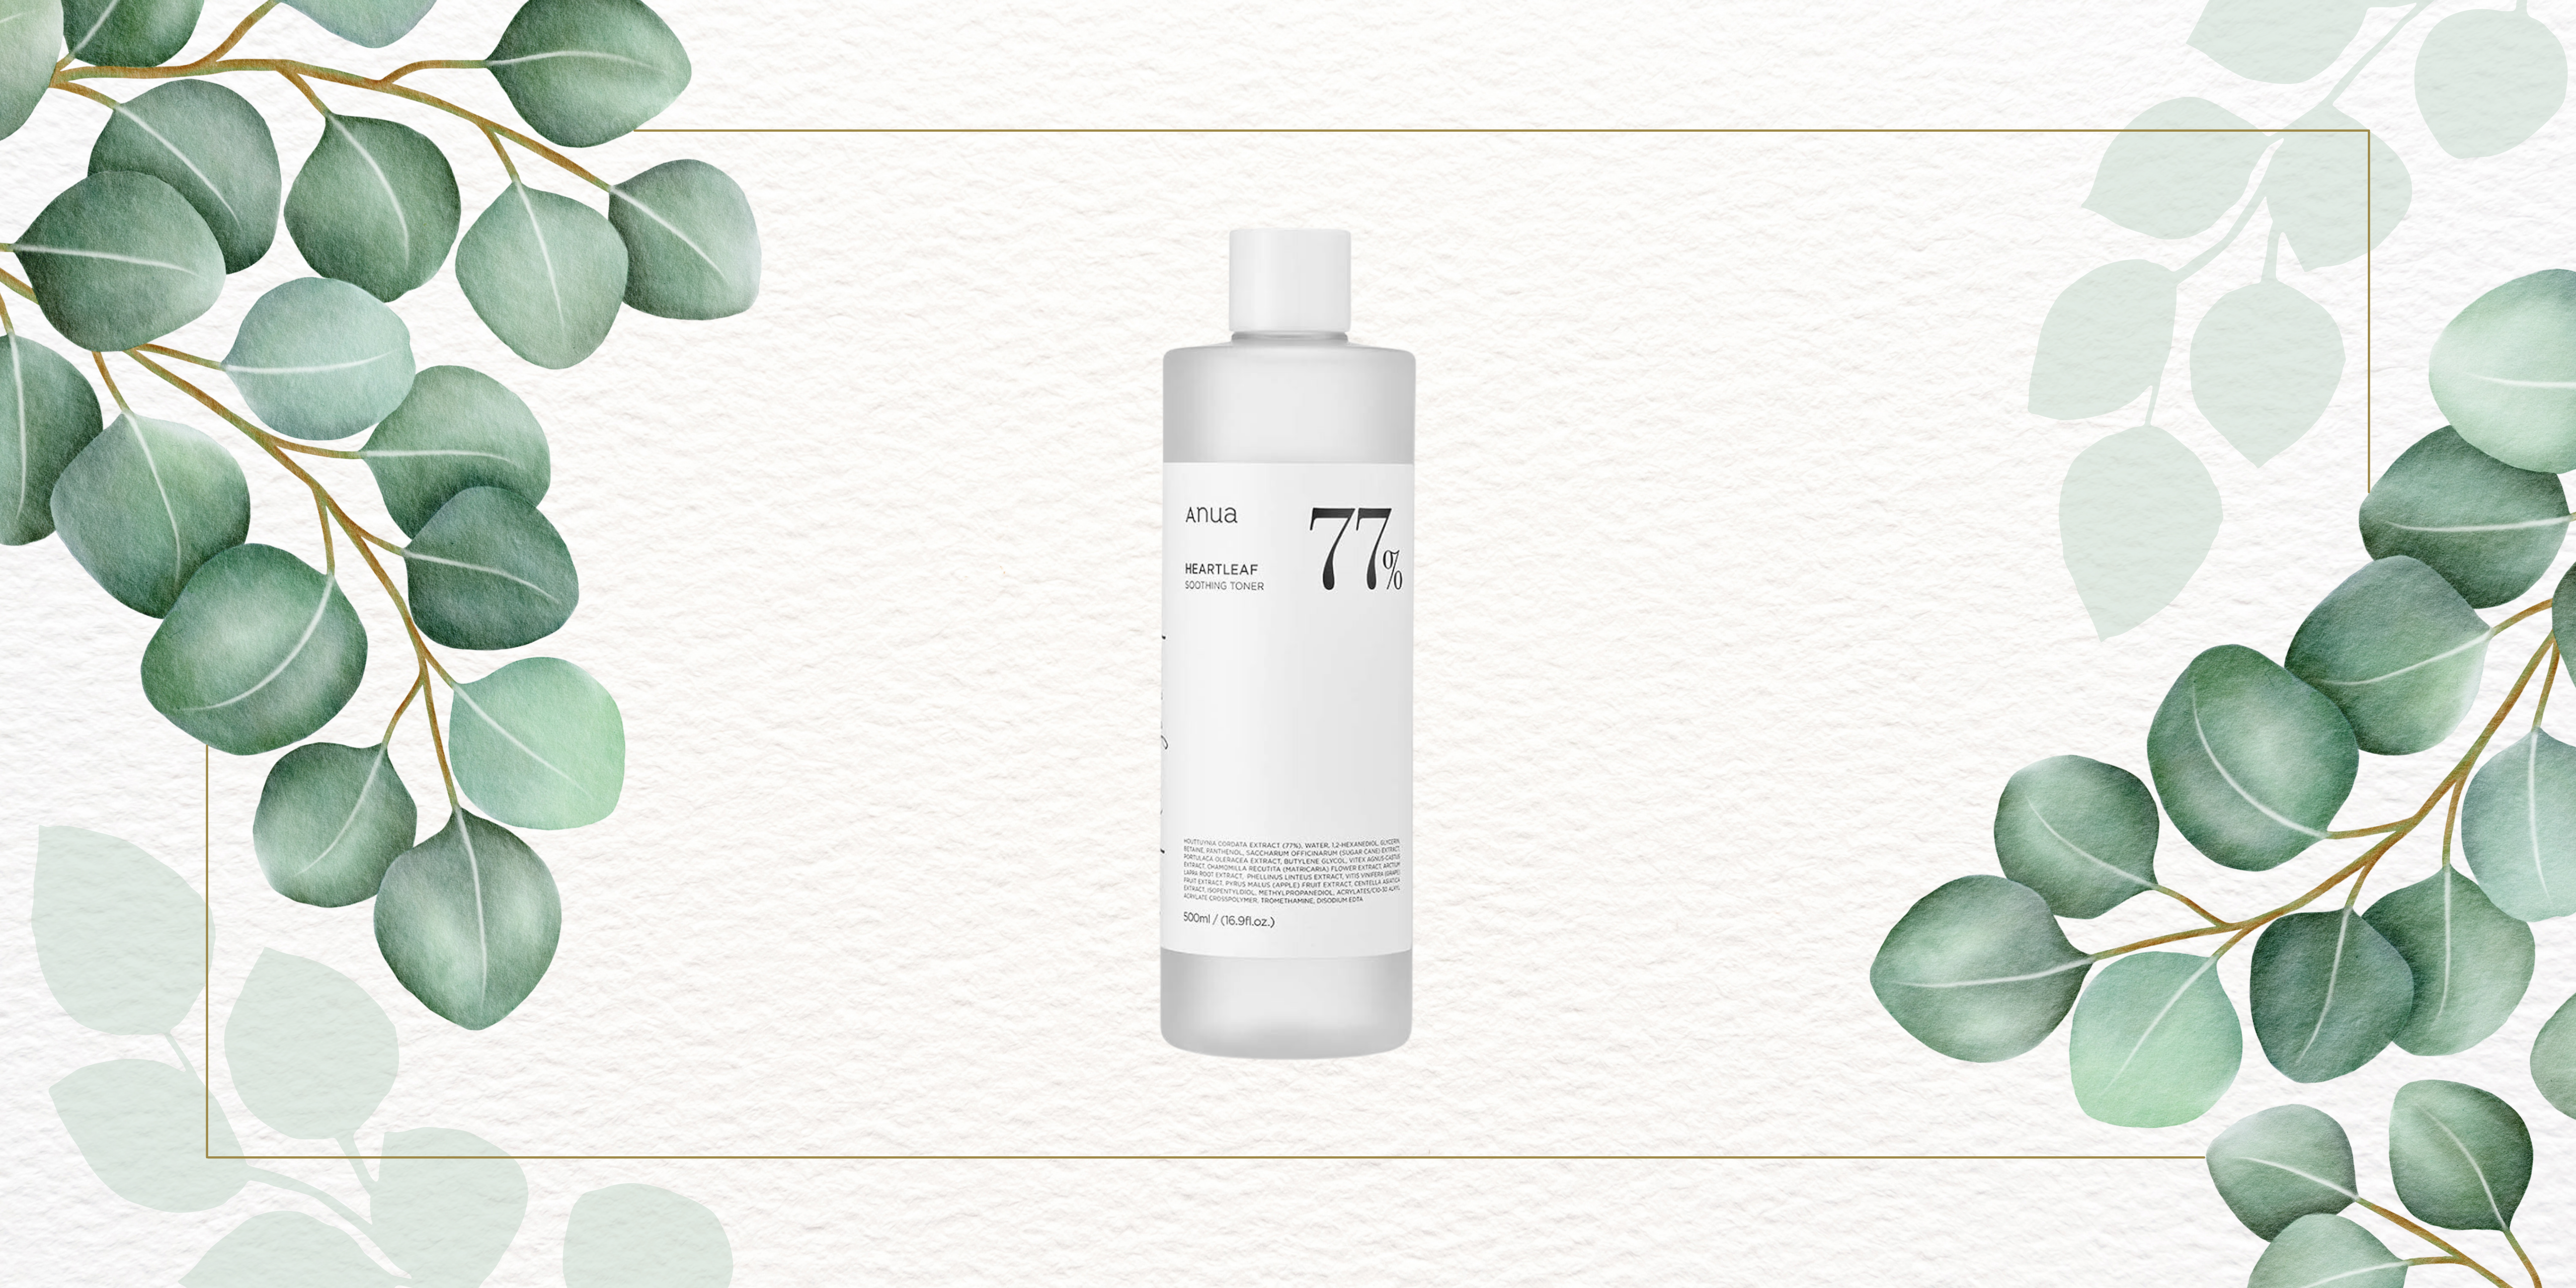 Anua Heartleaf 77% Soothing Toner - Unique Bunny